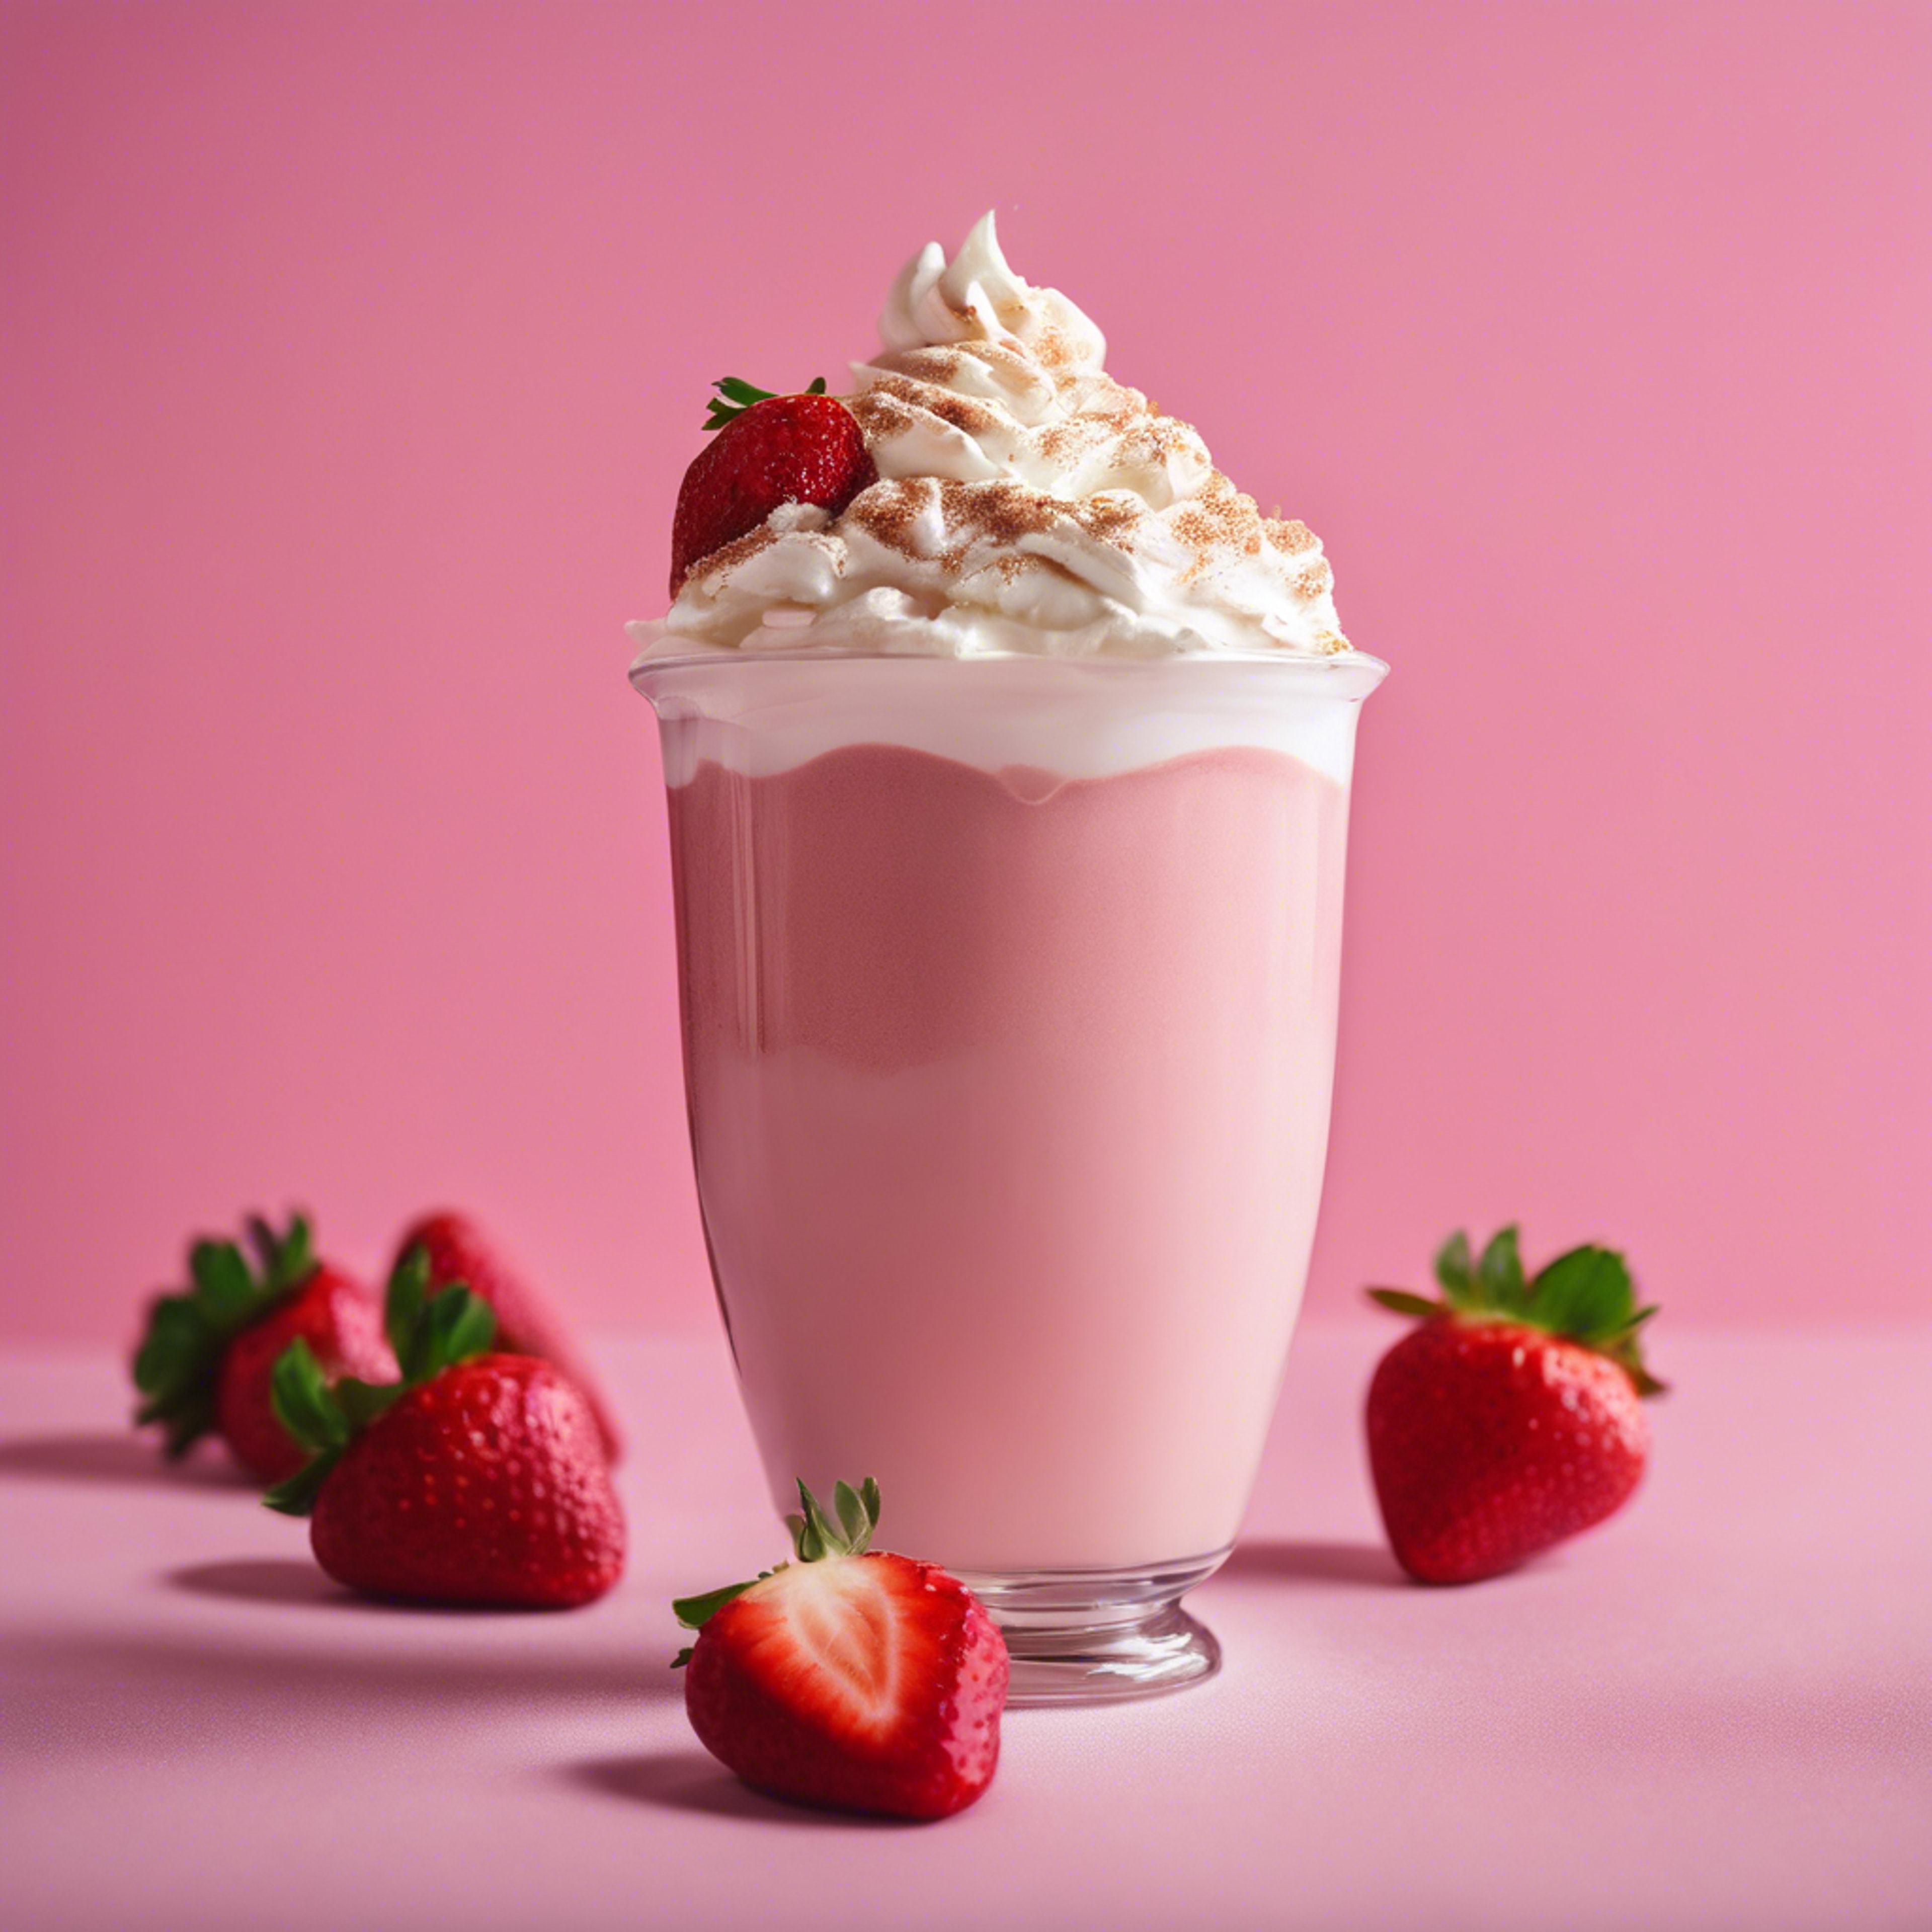 A freshly brewed strawberry latte with whipped cream against a pink backdrop. Tapet[f1420ed34c924526b0ea]